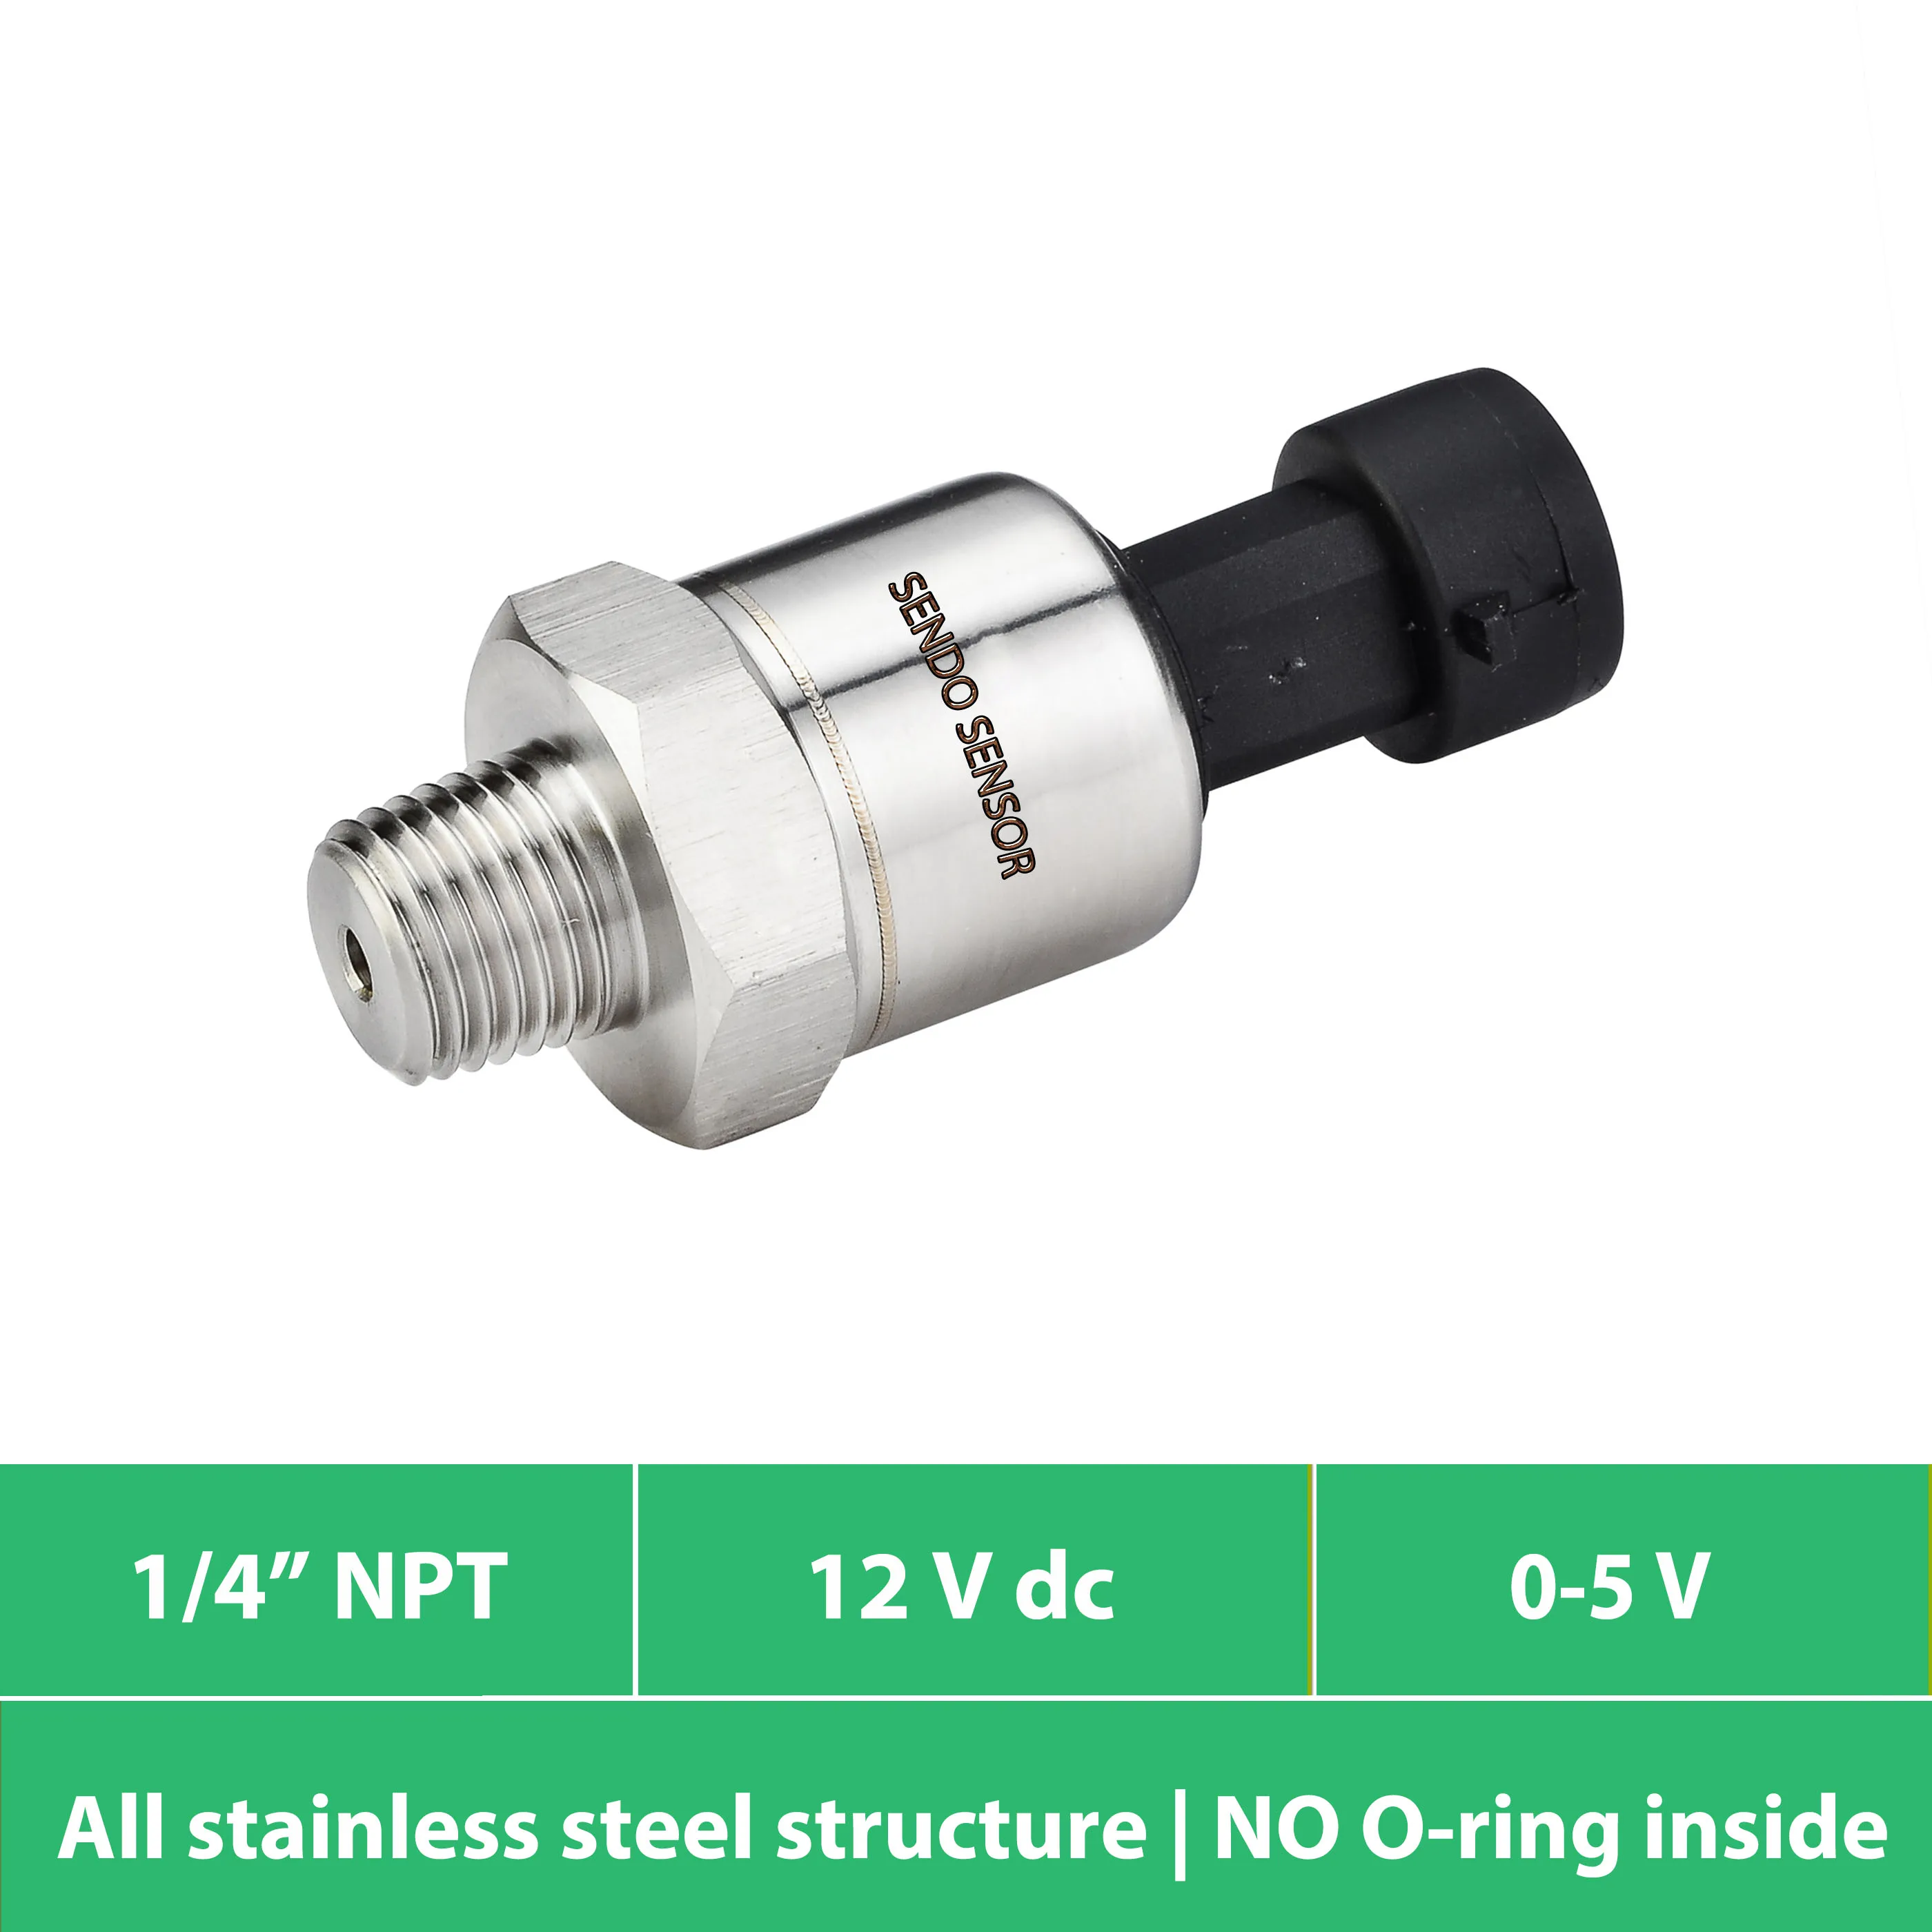 0 5v isolated pressure sensor, seal free, fully welded, range 0 to 15 psi, 1 bar, 100 kpa, up to 1500 psi, 10 mpa, 100 bar gauge